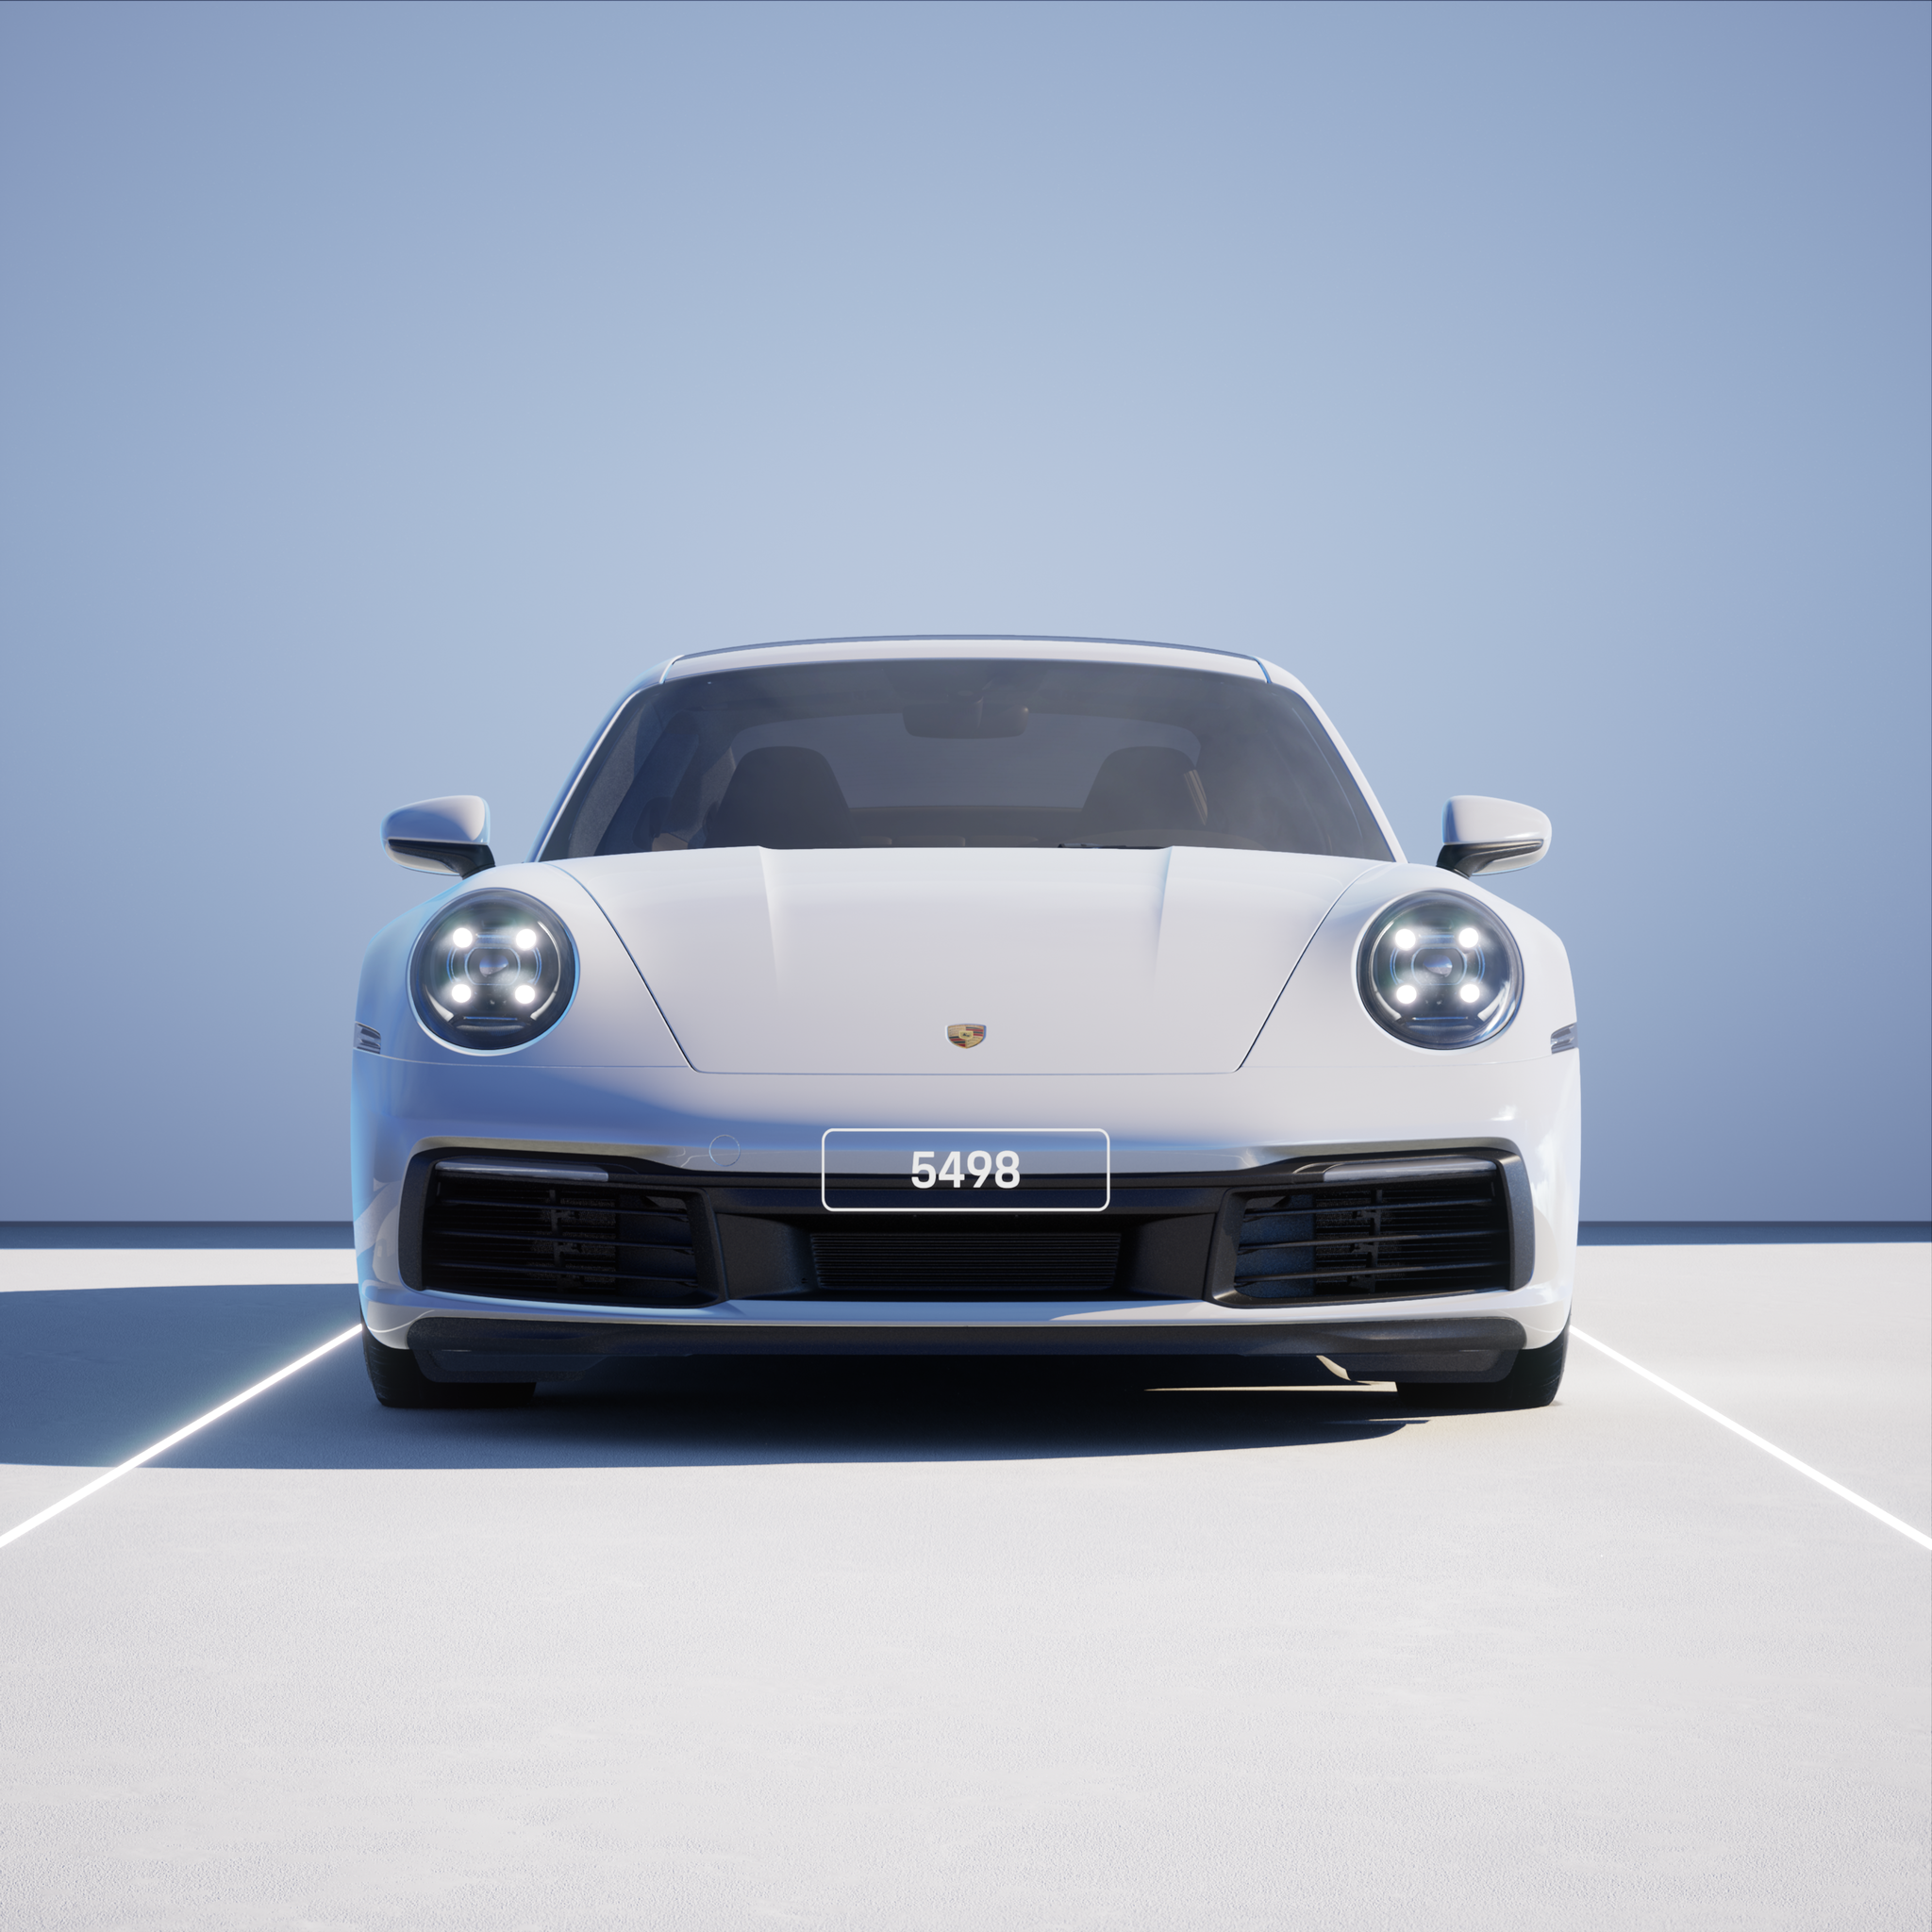 The PORSCHΞ 911 5498 image in phase